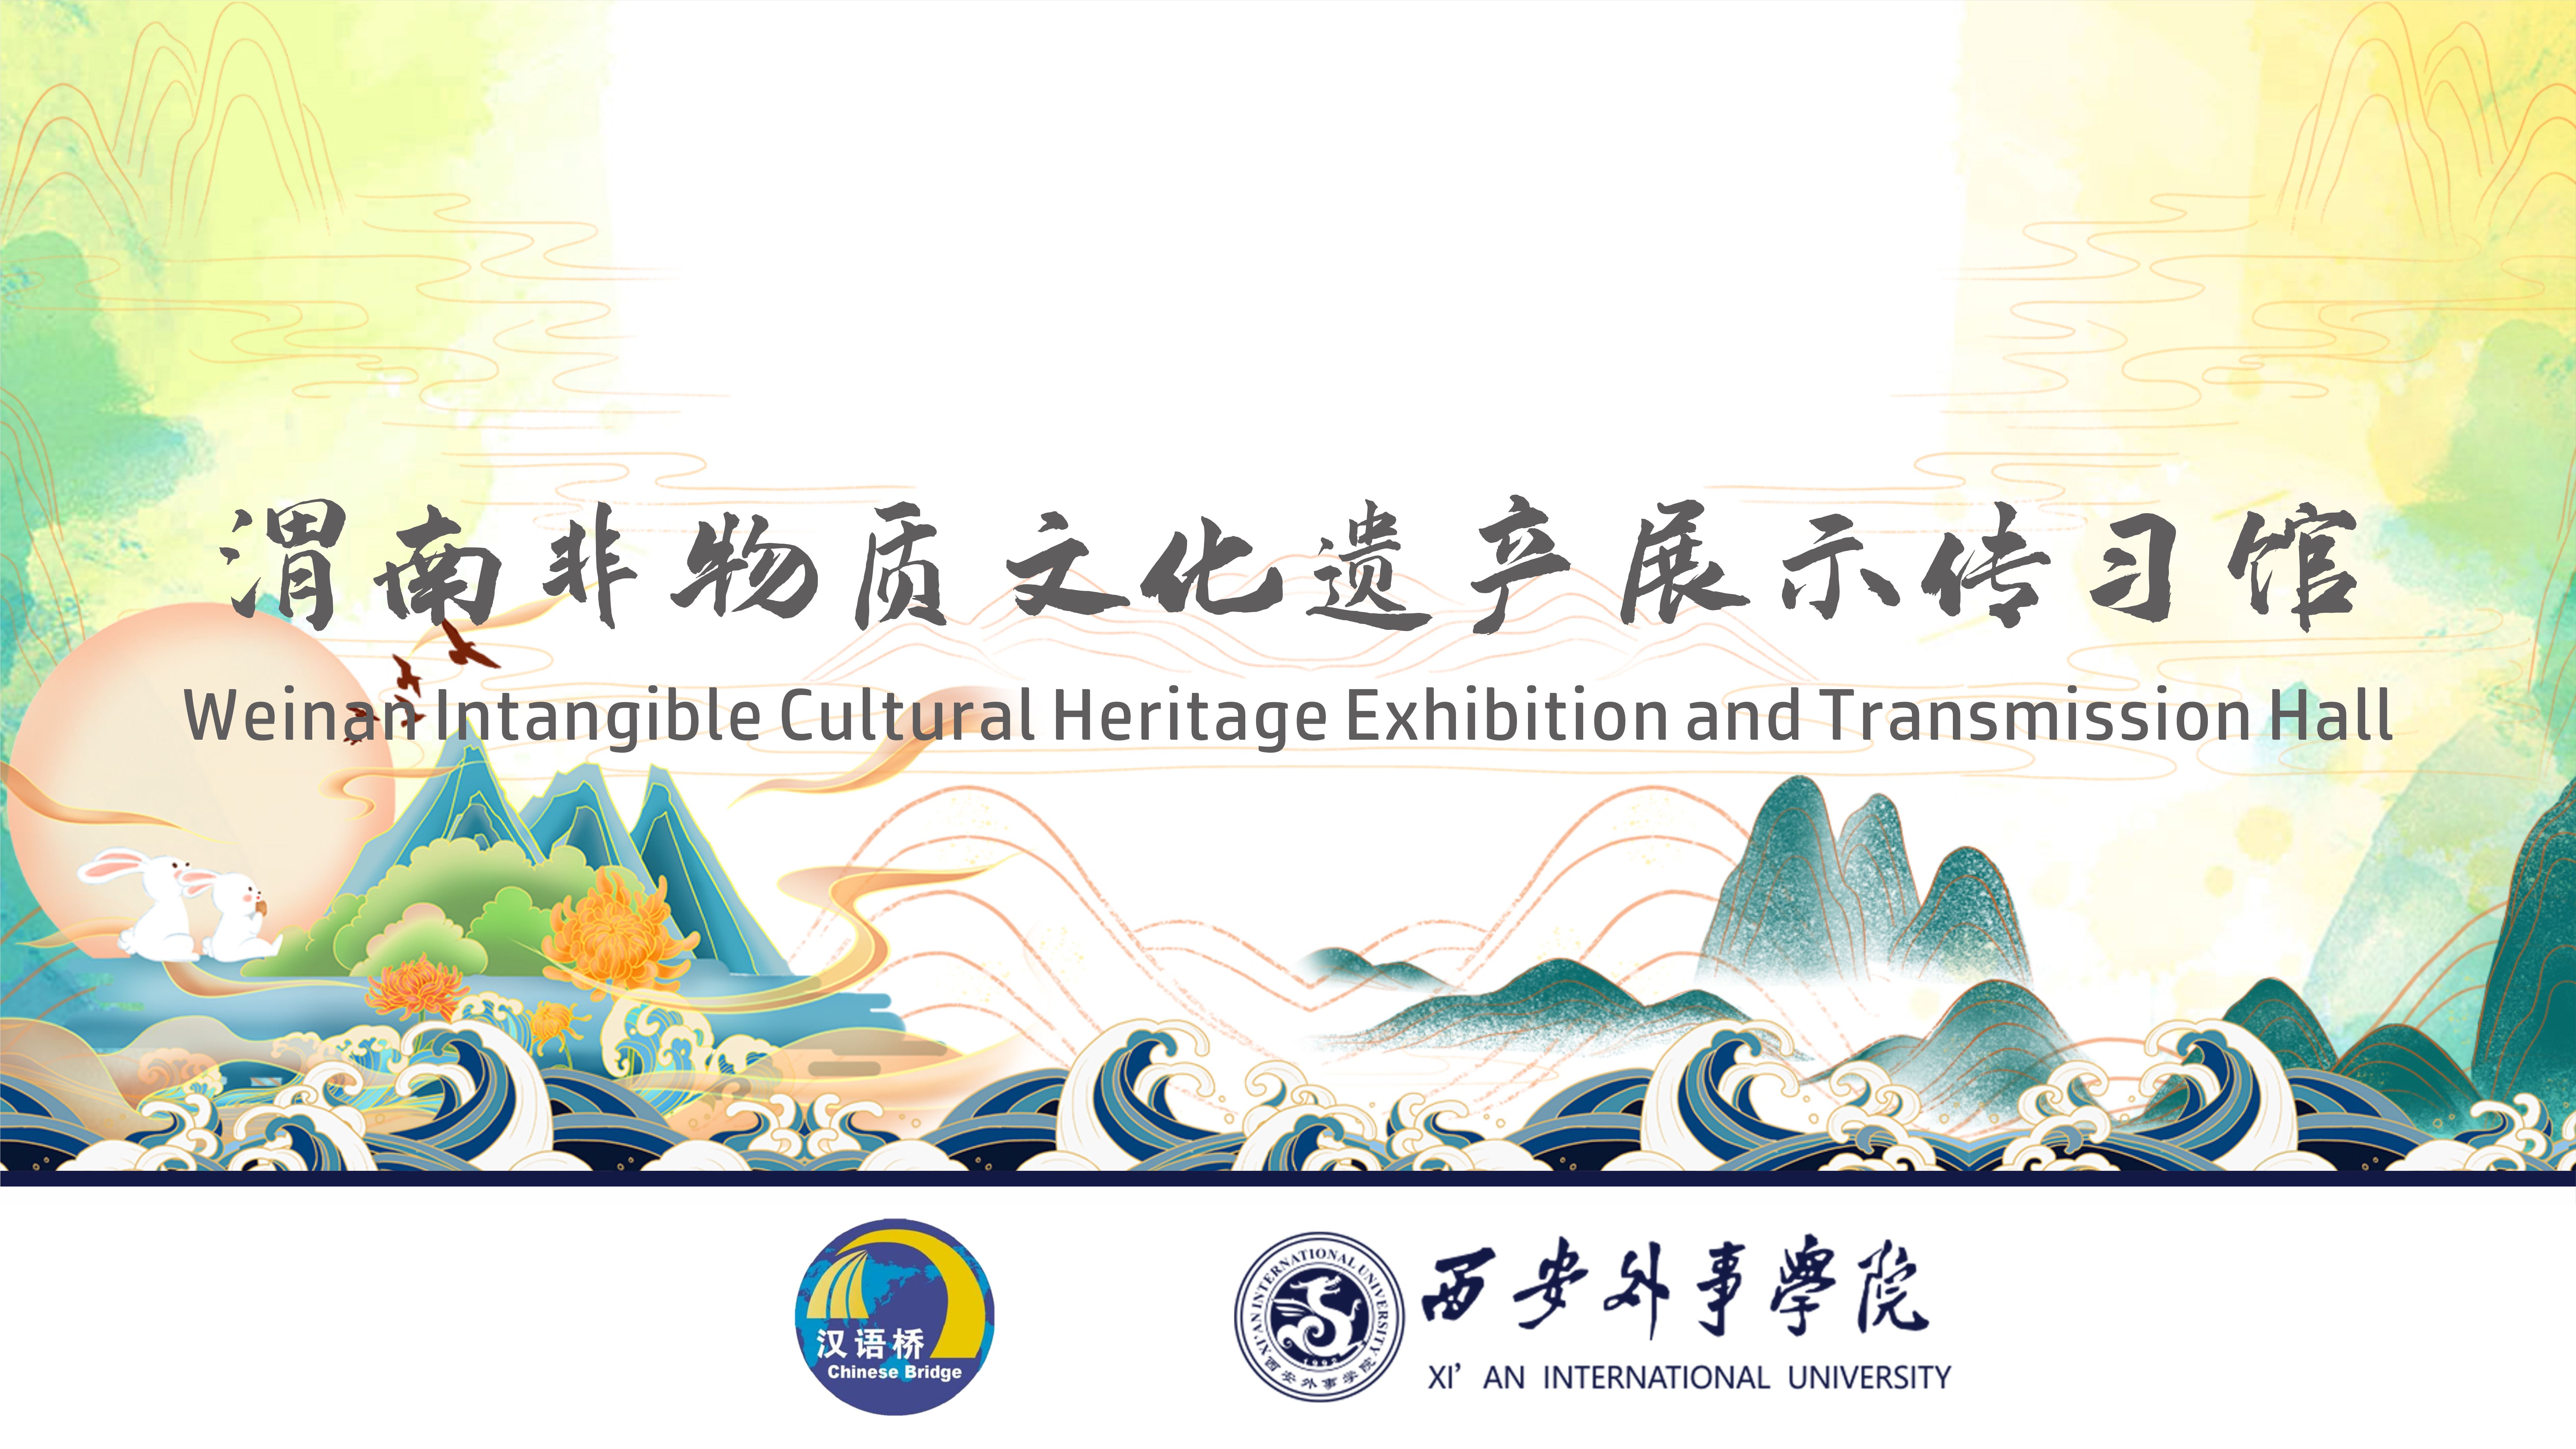 Weinan Intangible Cultural Heritage Exhibition and Transmission Hall